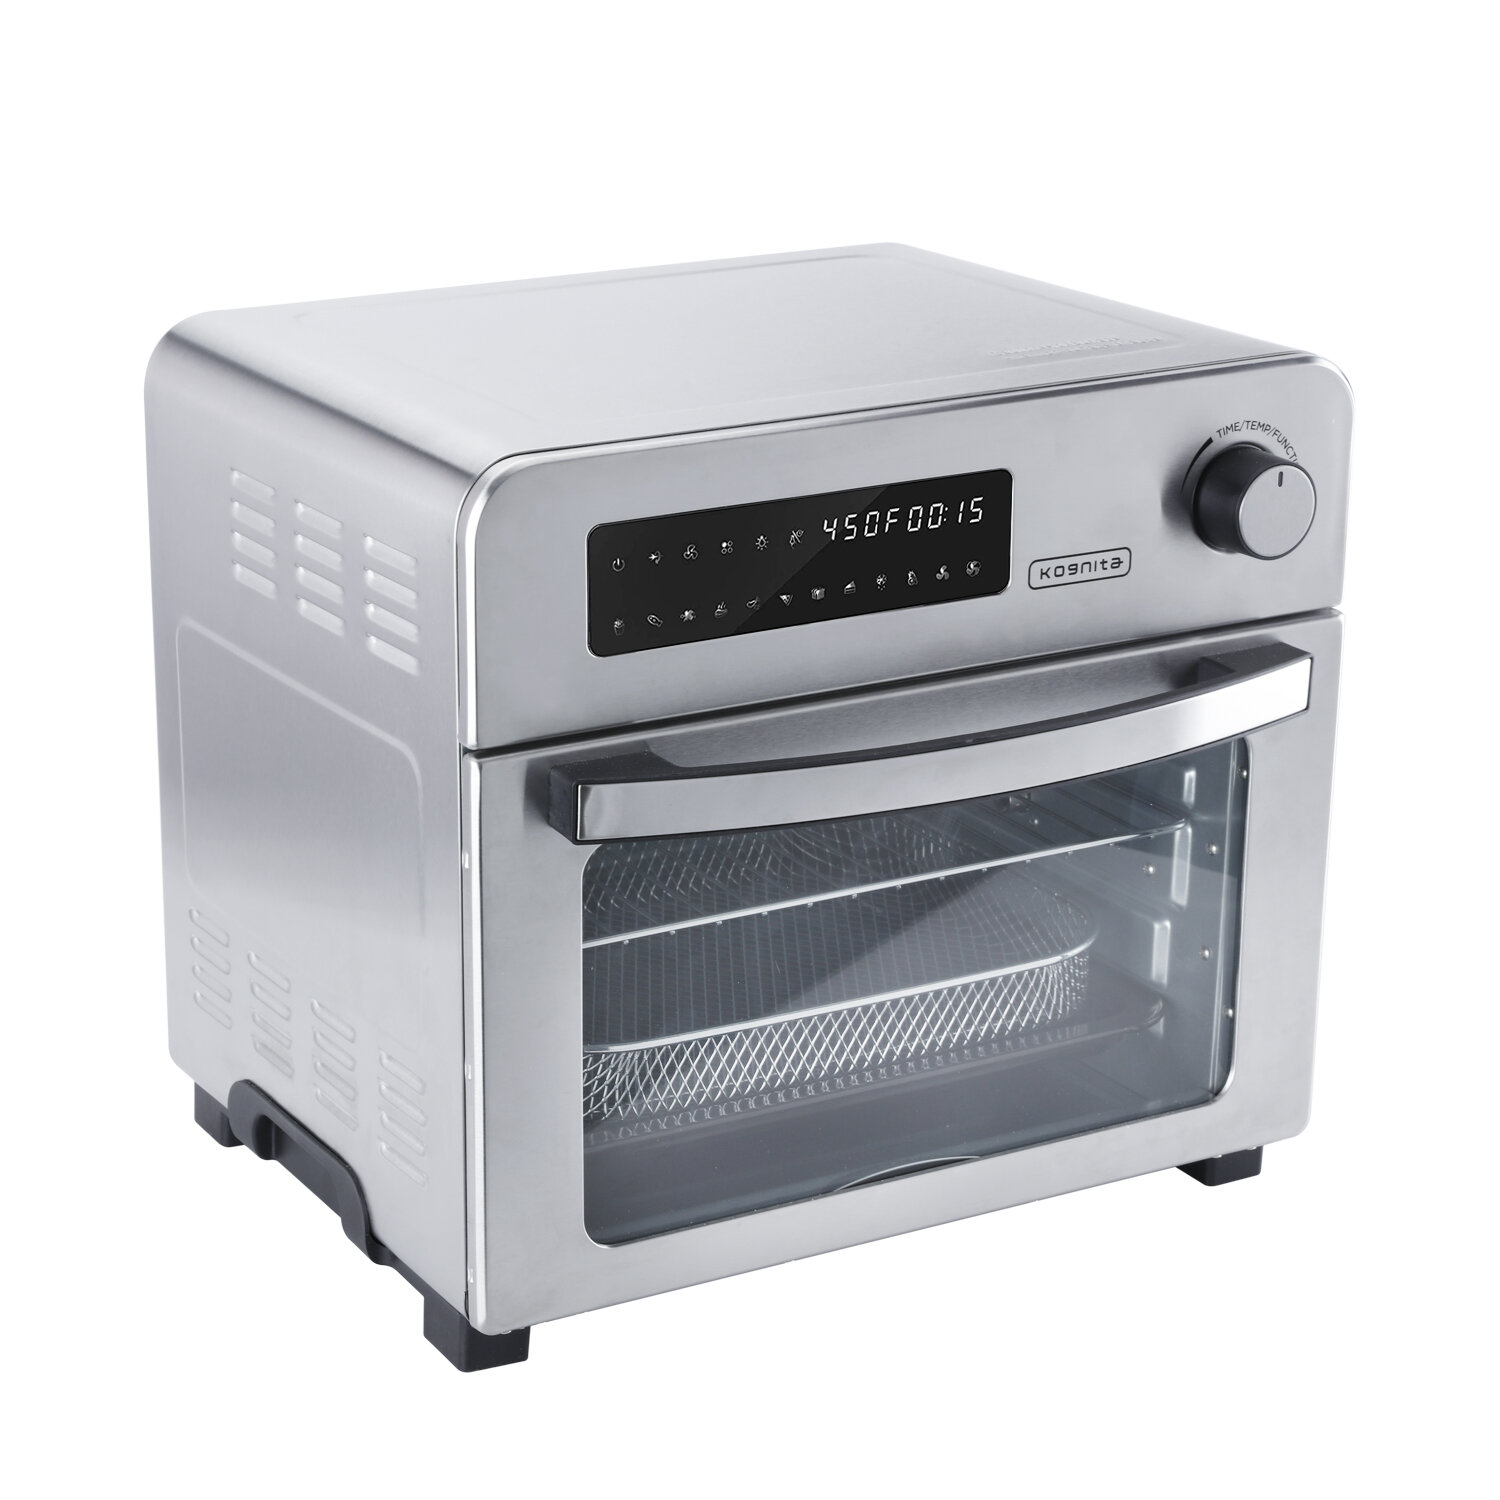 Black & Decker TO1760SS 4-Slice Toaster Oven - Silver